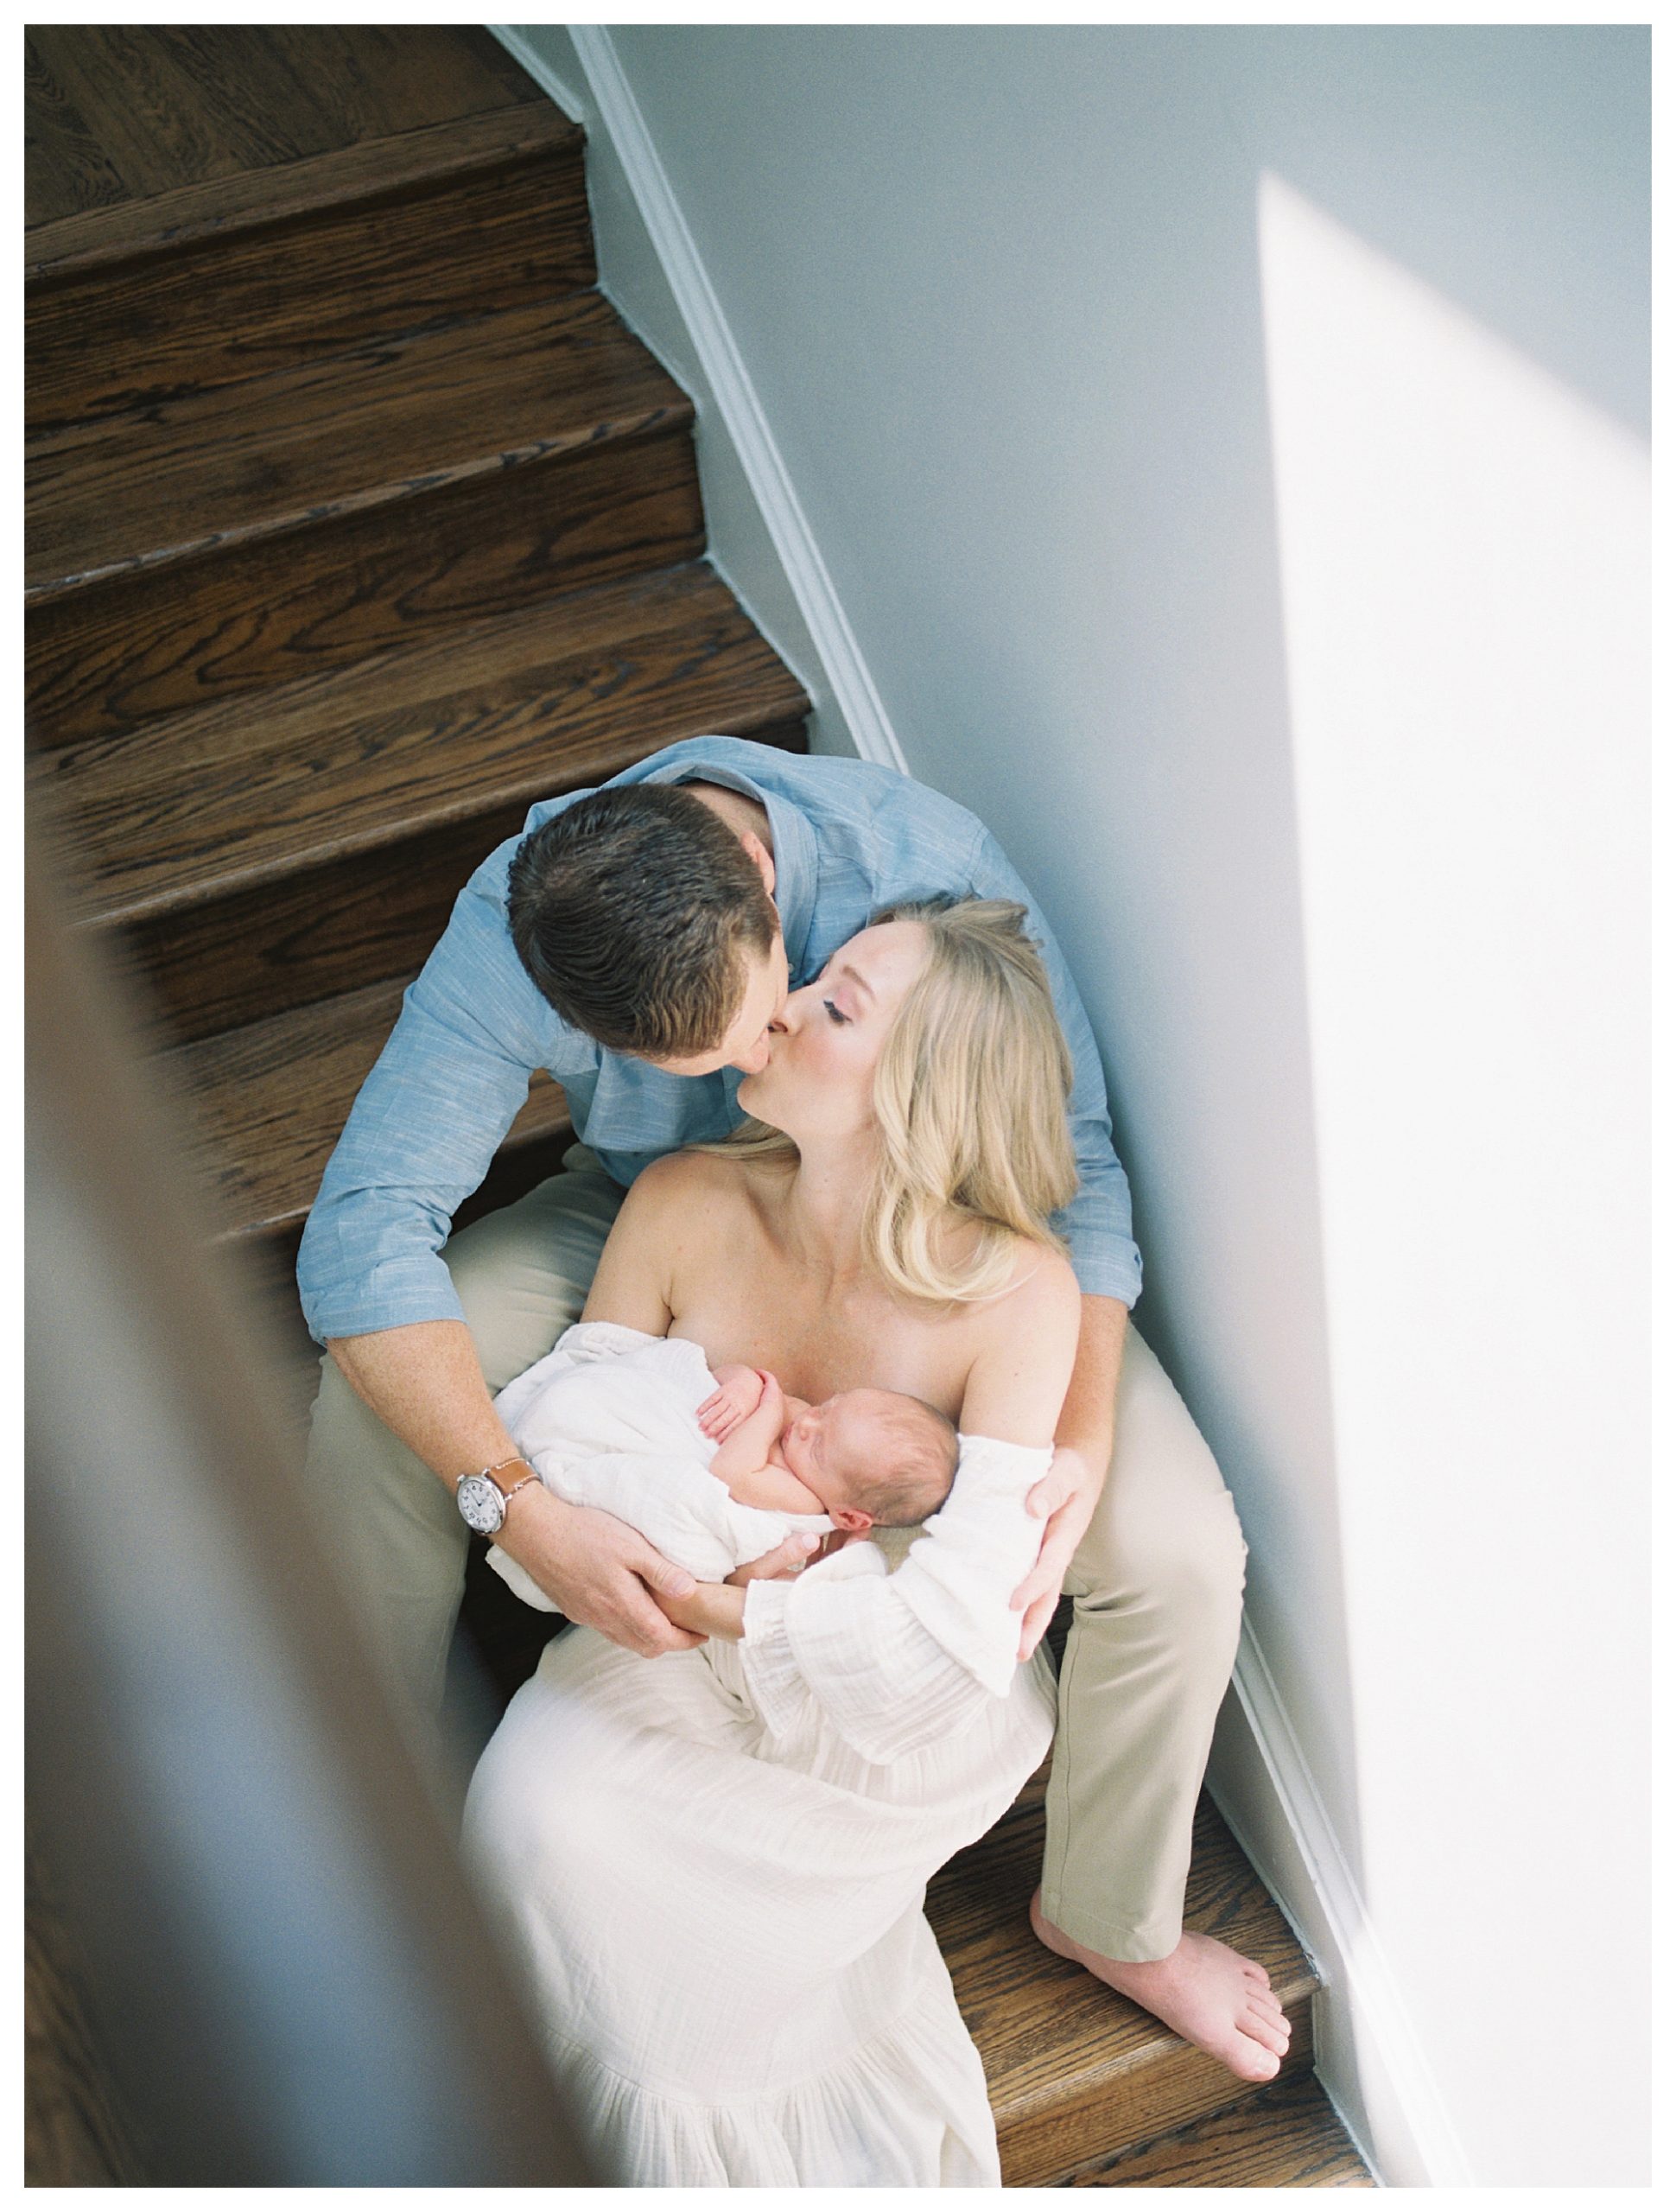 Mother and father sit on steps and kiss while holding newborn baby.